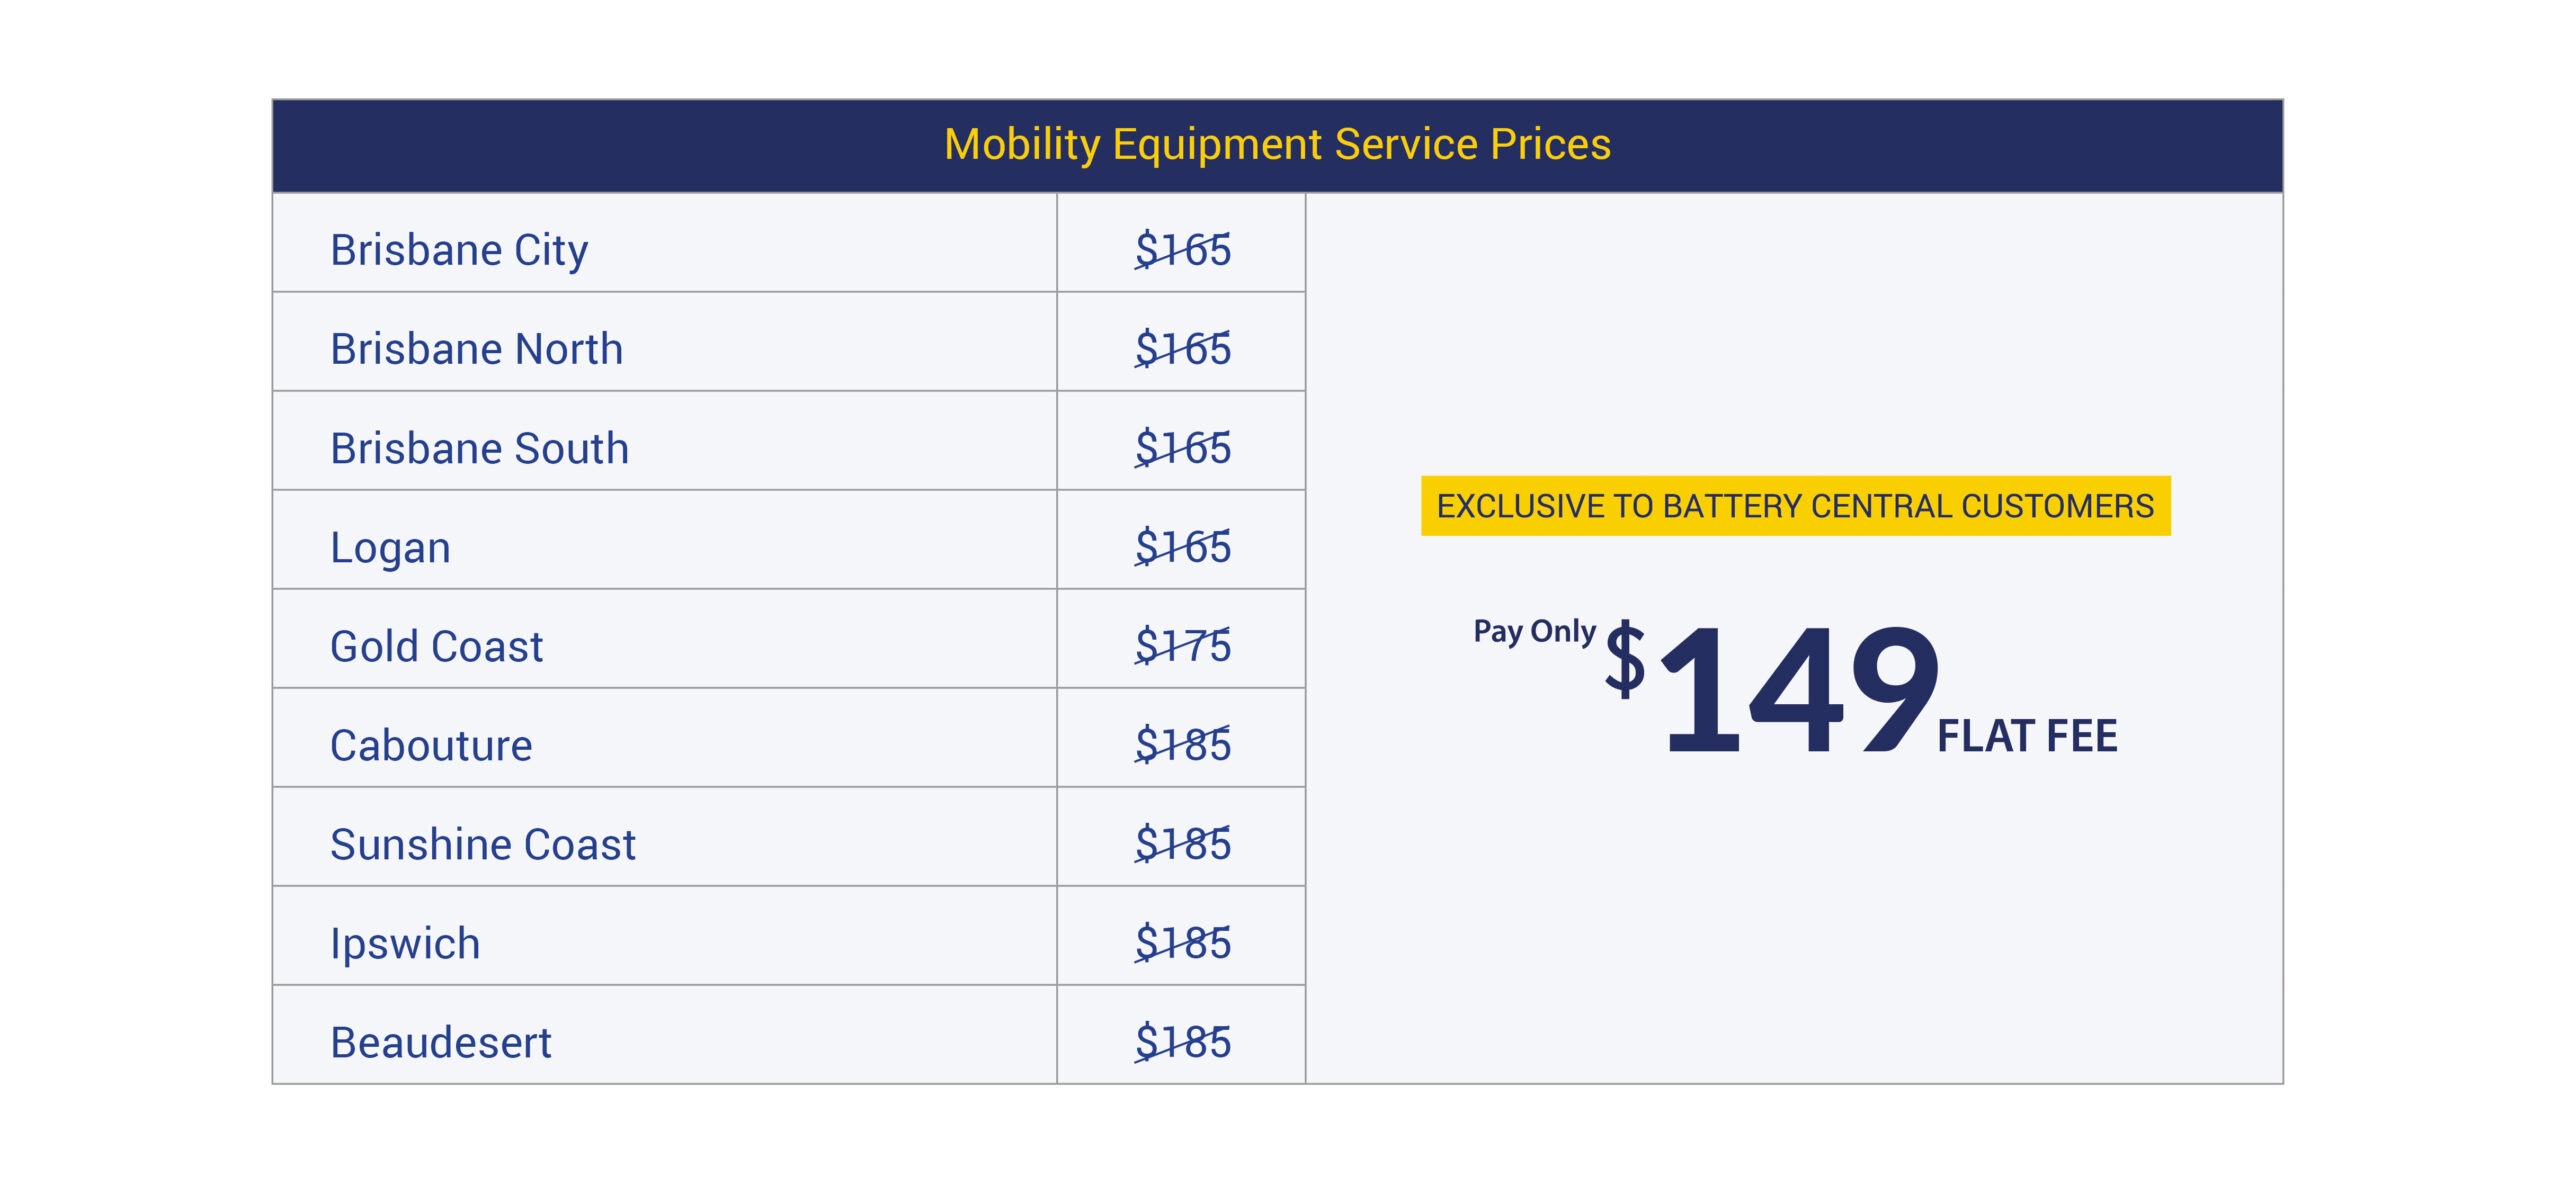 Mobility Equipment Service Prices